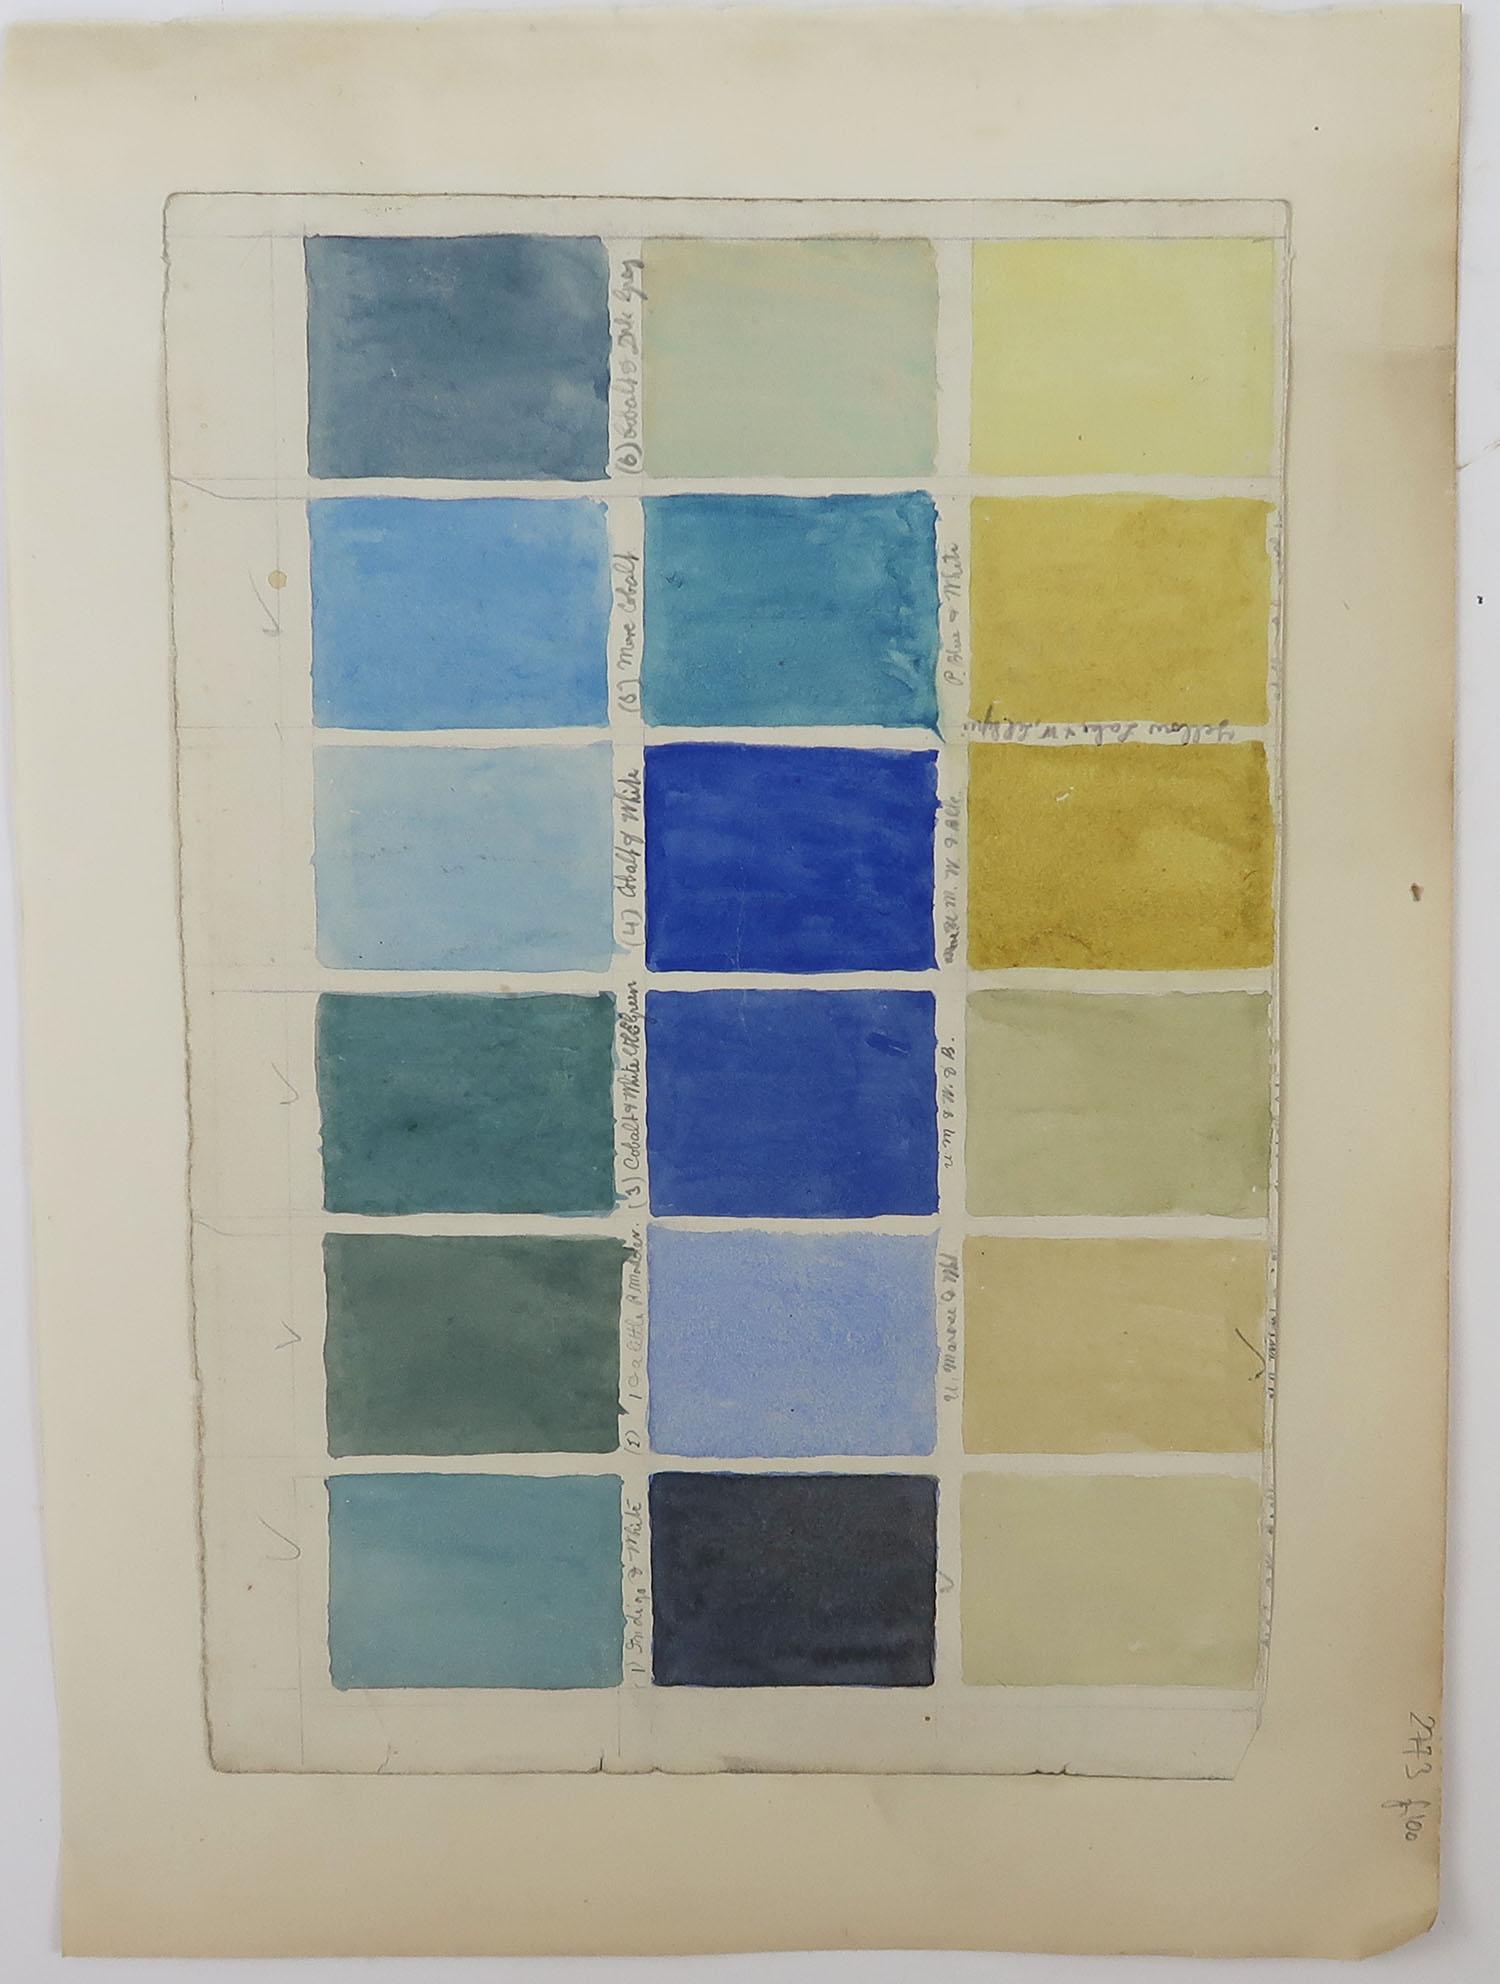 English Original Artwork from a Student of Textile Design, 1897